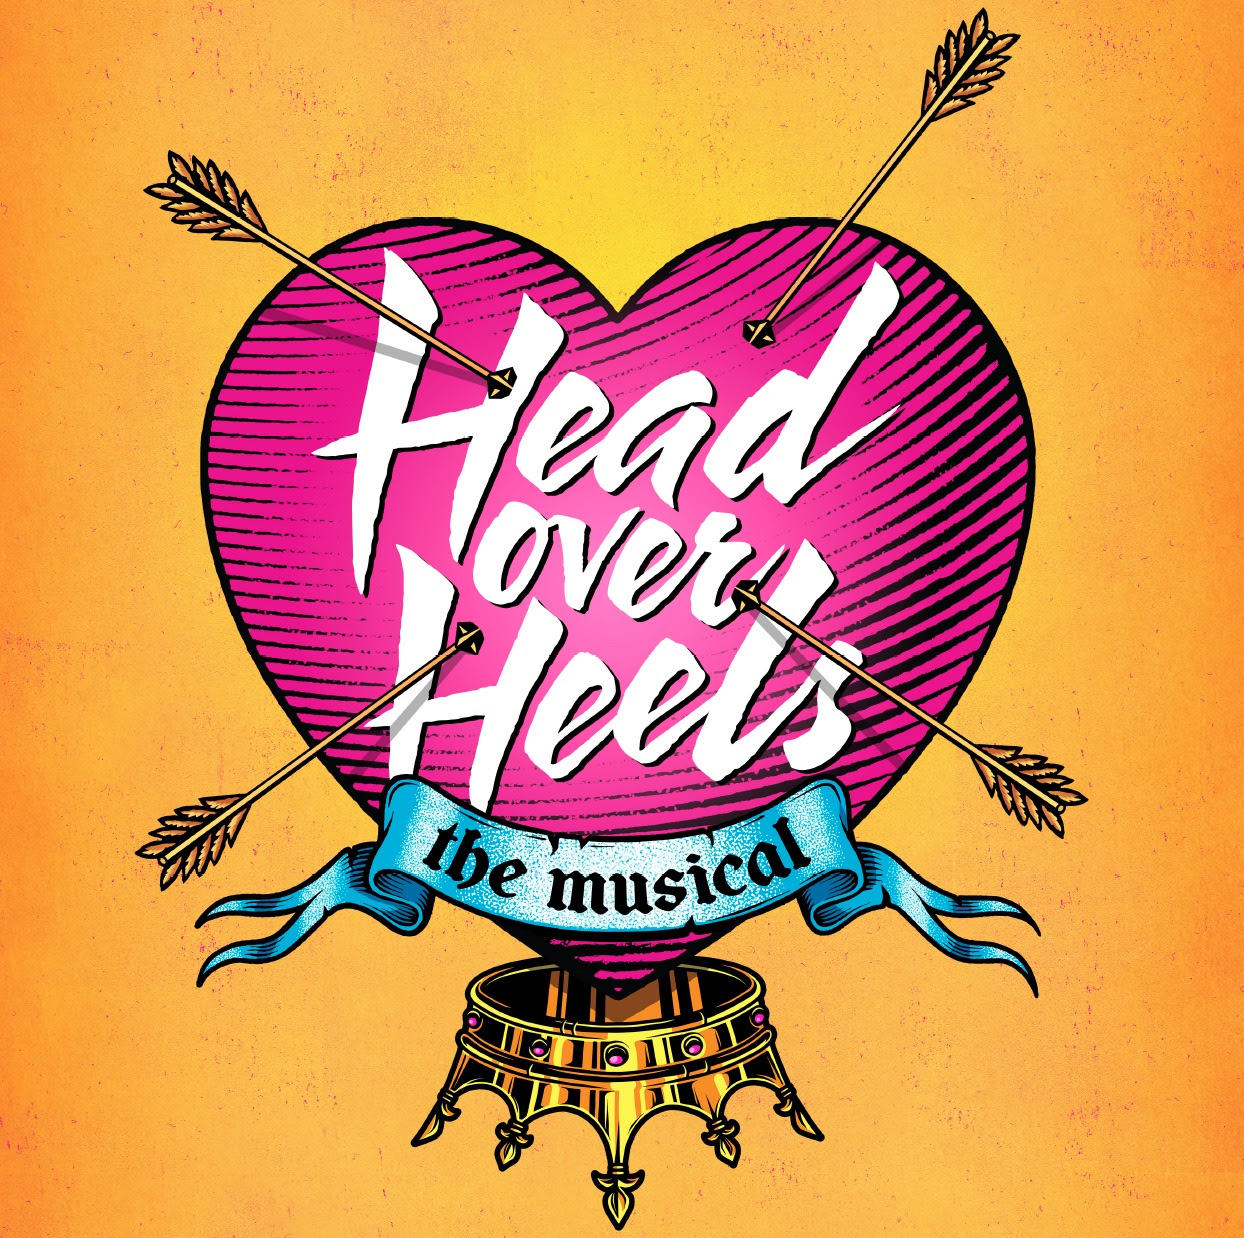 We Know You Can Dance to the Beat: An Interview with Brian Boruta about Umbrella Stage’s “Head Over Heels”